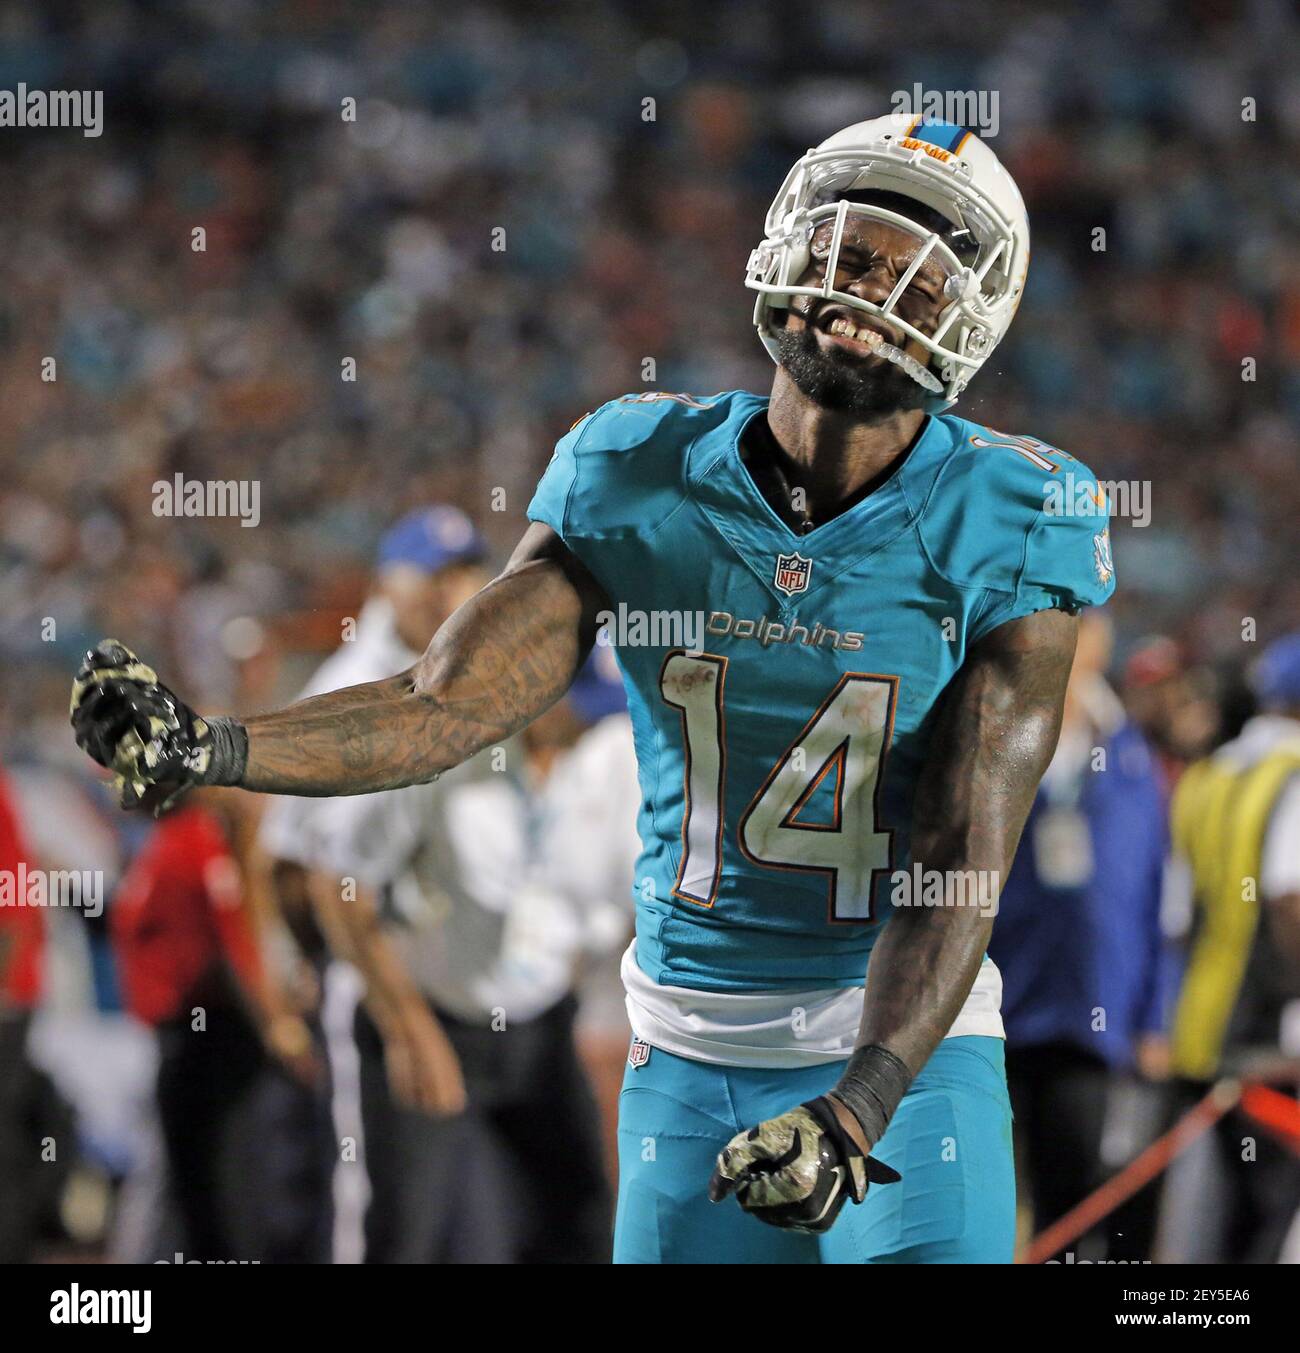 Download Miami Dolphins Jarvis Landry Wallpaper